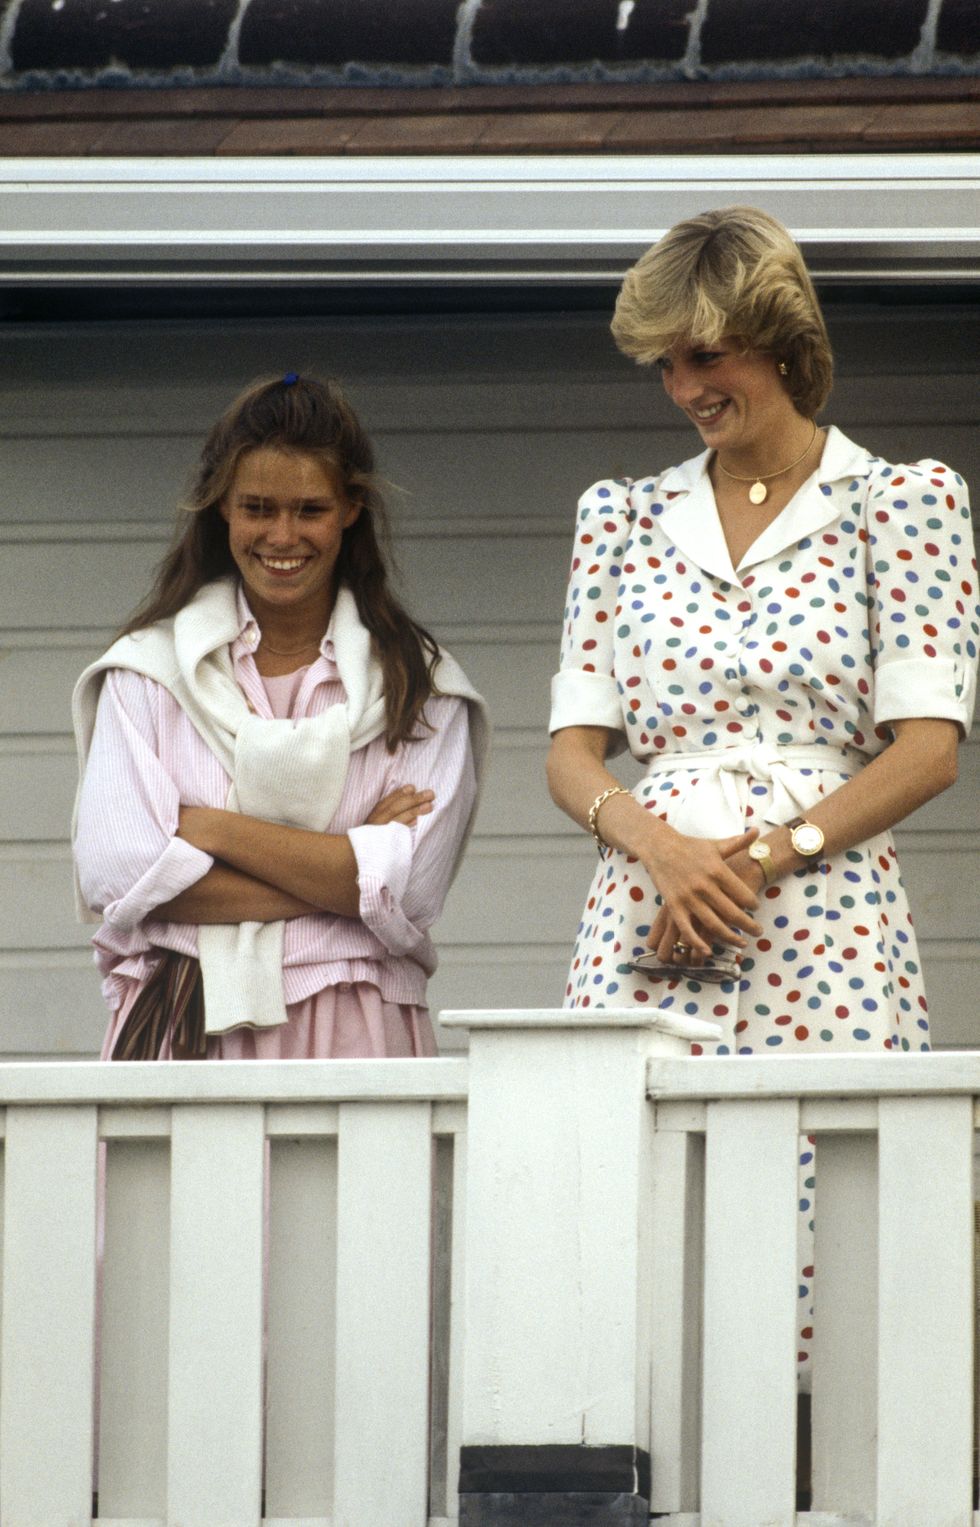 windsor   july 24 diana, princess of wales with lady sarah armstrong jones at guards polo club in windsor on july 24, 1983 photo by david levensongetty images